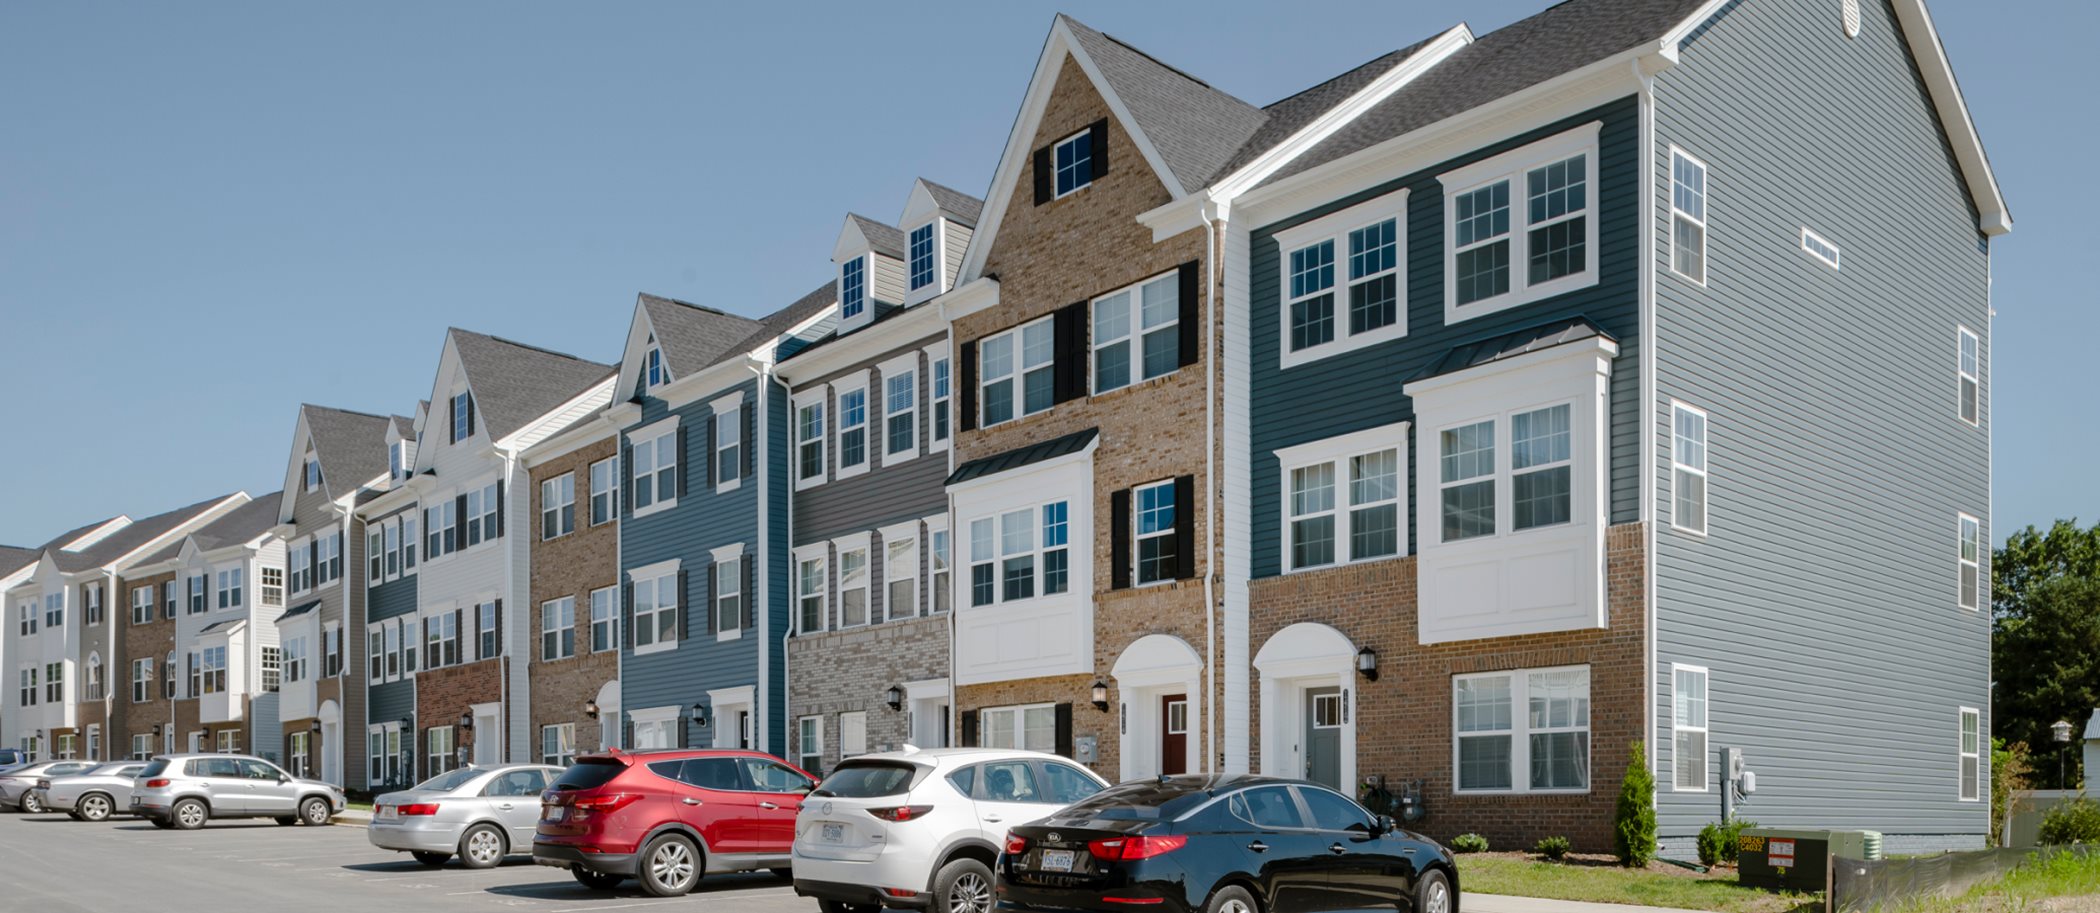 Townhomes exterior photo